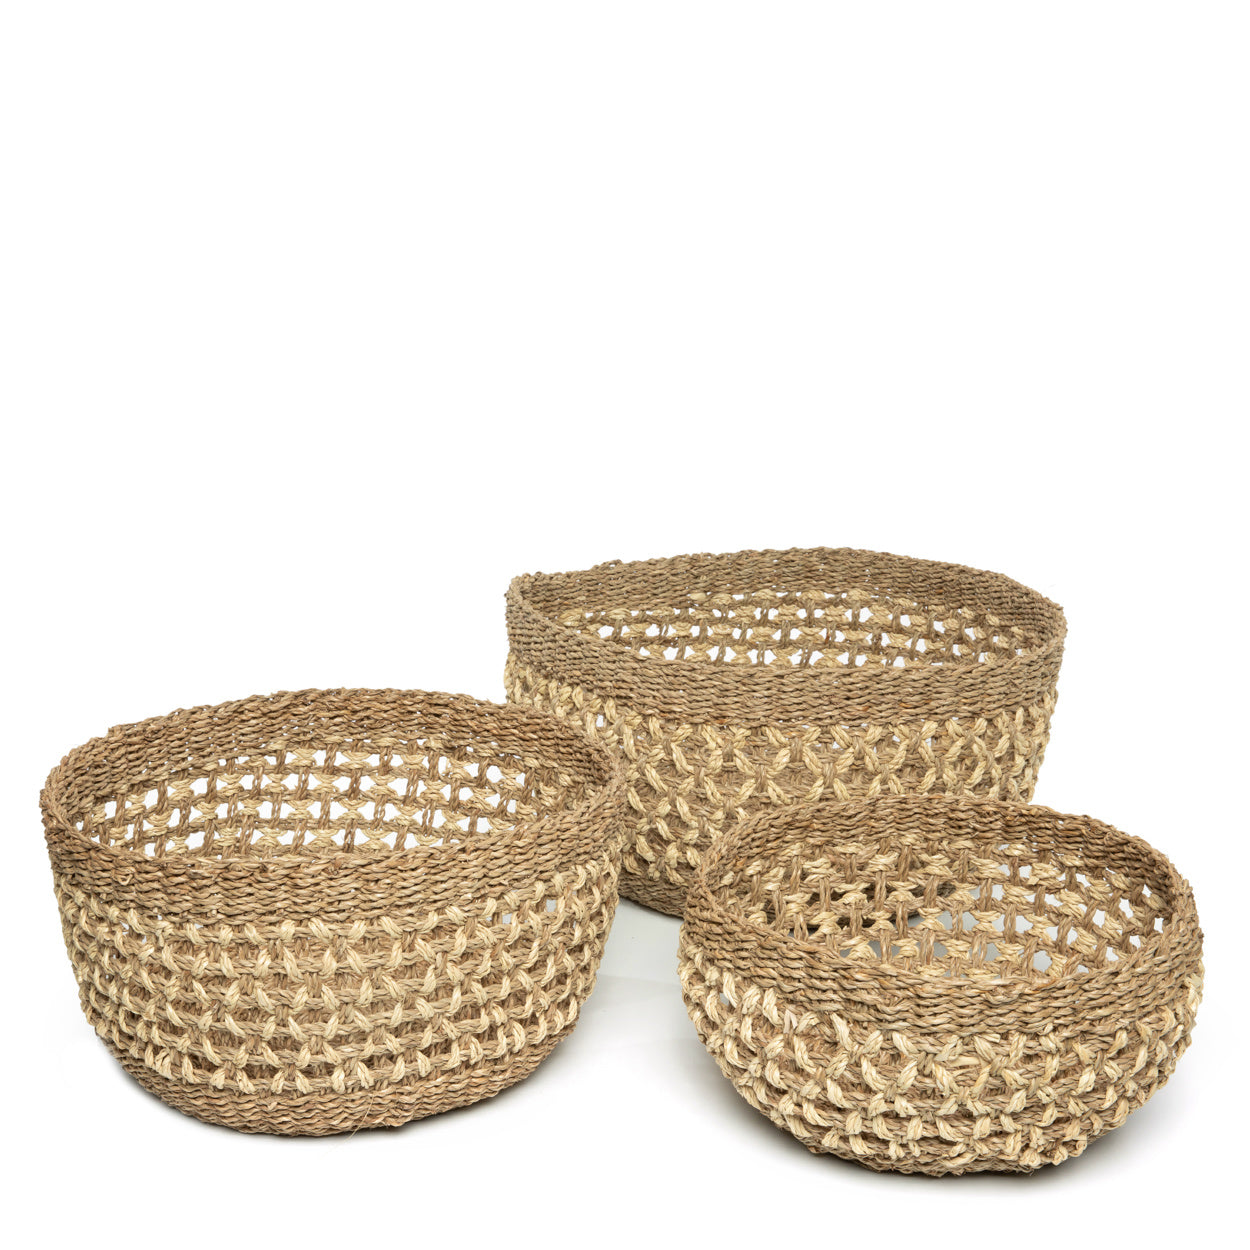 THE PHU QUOC Baskets Set of 3 FRONT VIEW